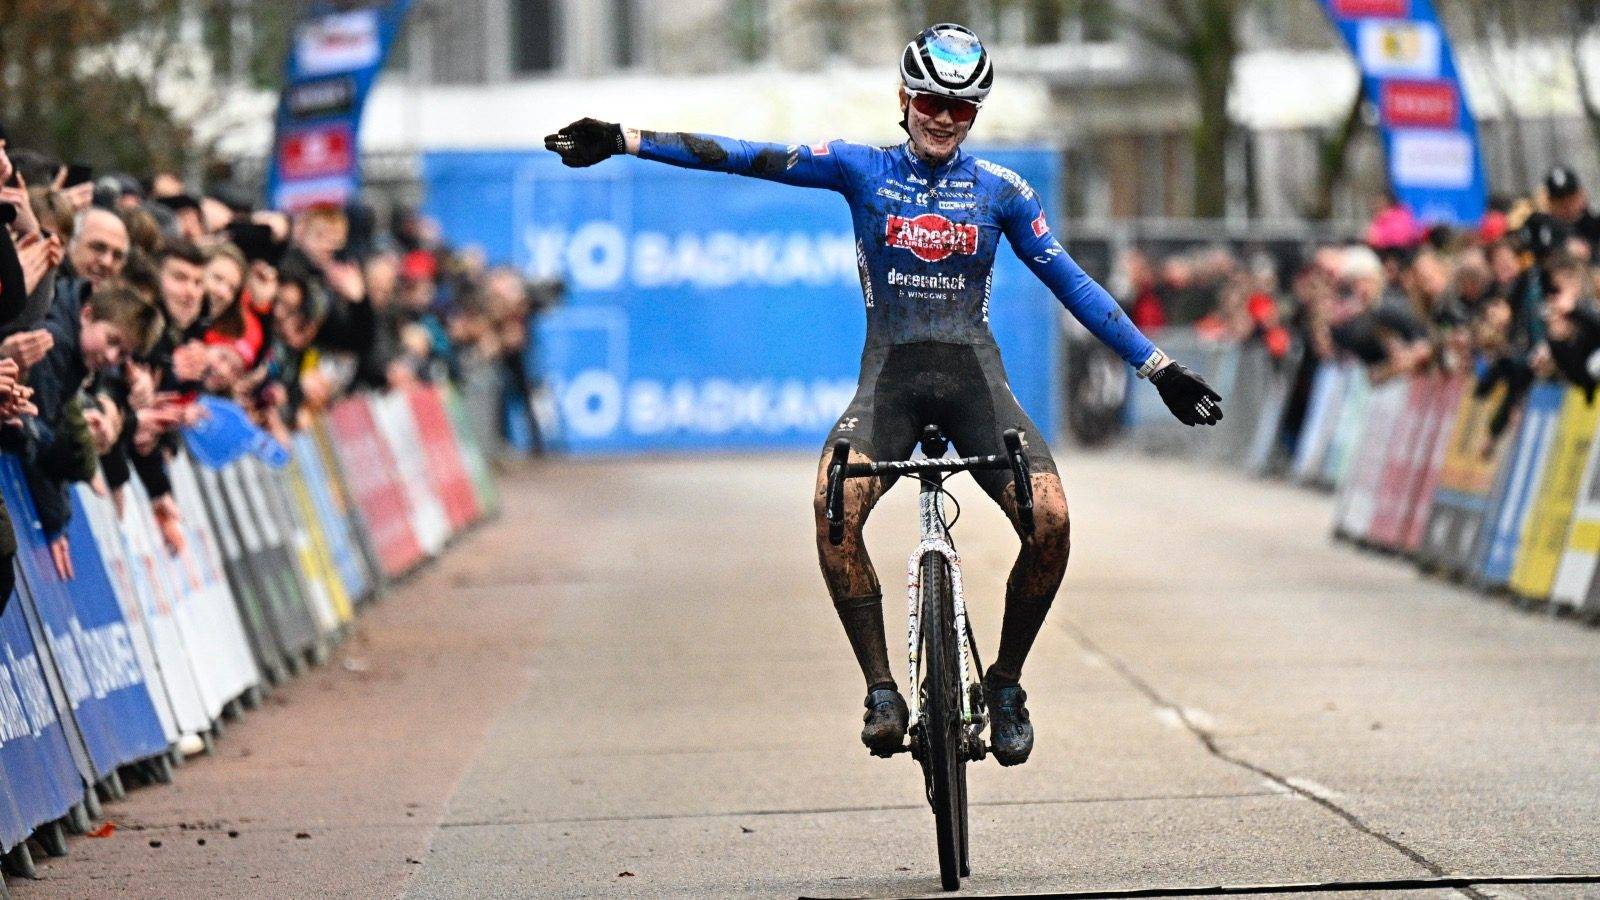 LIVE FEED Action pictures of the 'Herentals Crosst' cyclocross cycling event on Tuesday 03 January 2023 in Herentals, the fourth stage in the X2O Badkamers 'Trofee Veldrijden' competition.
BELGA PHOTO JASPER JACOBS